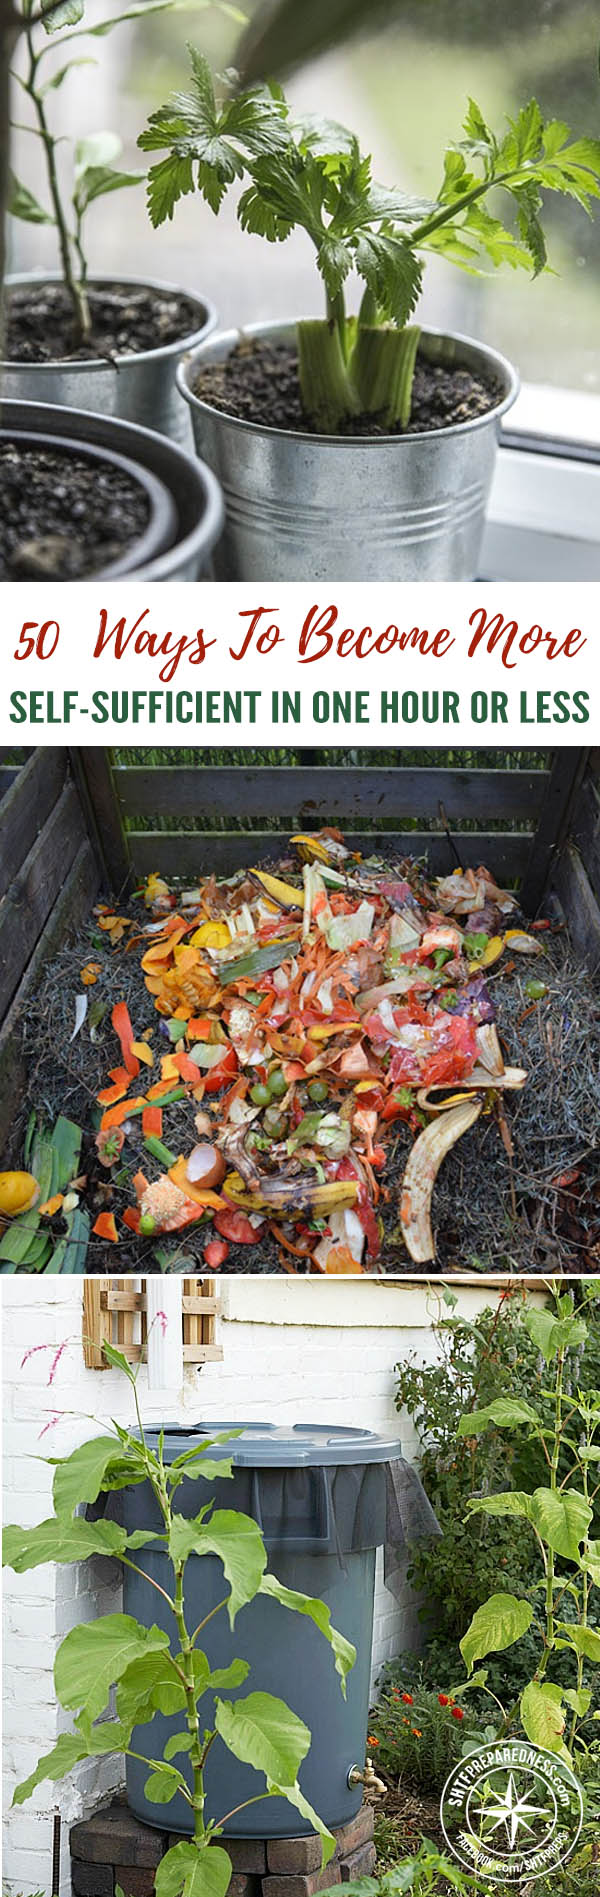 50 Ways to Become More Self-Sufficient in One Hour or Less — If you woke up one morning and you had no one to rely on but yourself, could you do it? Could you be entirely self-sufficient, with food, shelter, and other necessities? It is easy to take things for granted when they are so easily come by-a drive to the supermarket can solve so many problems.